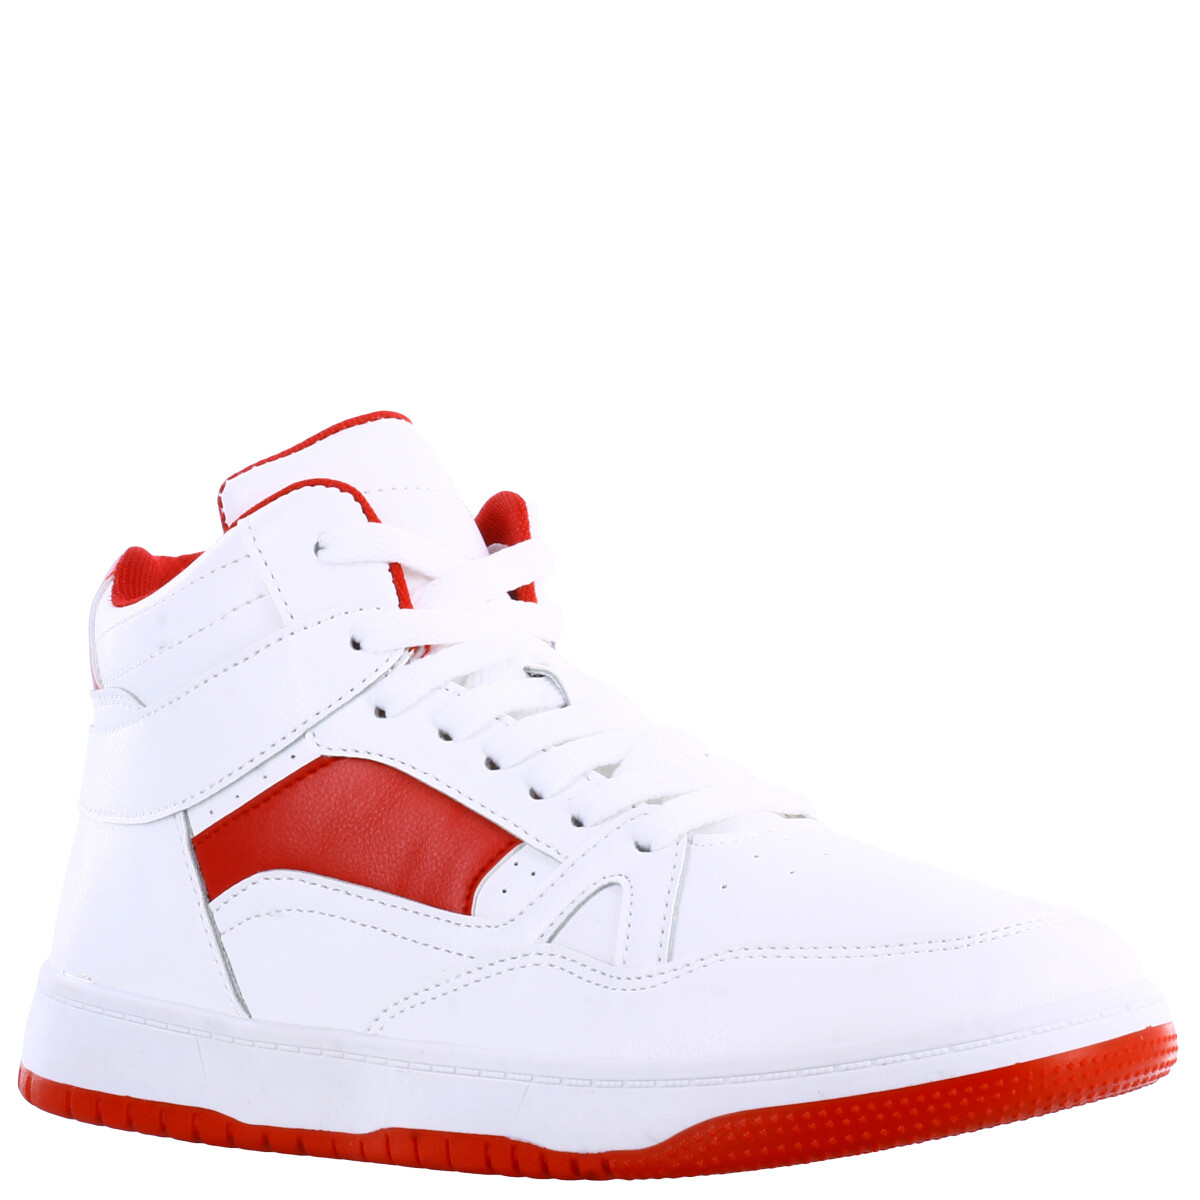 Deportivo ROCKY bicolor North Sails N+ - White/Red 